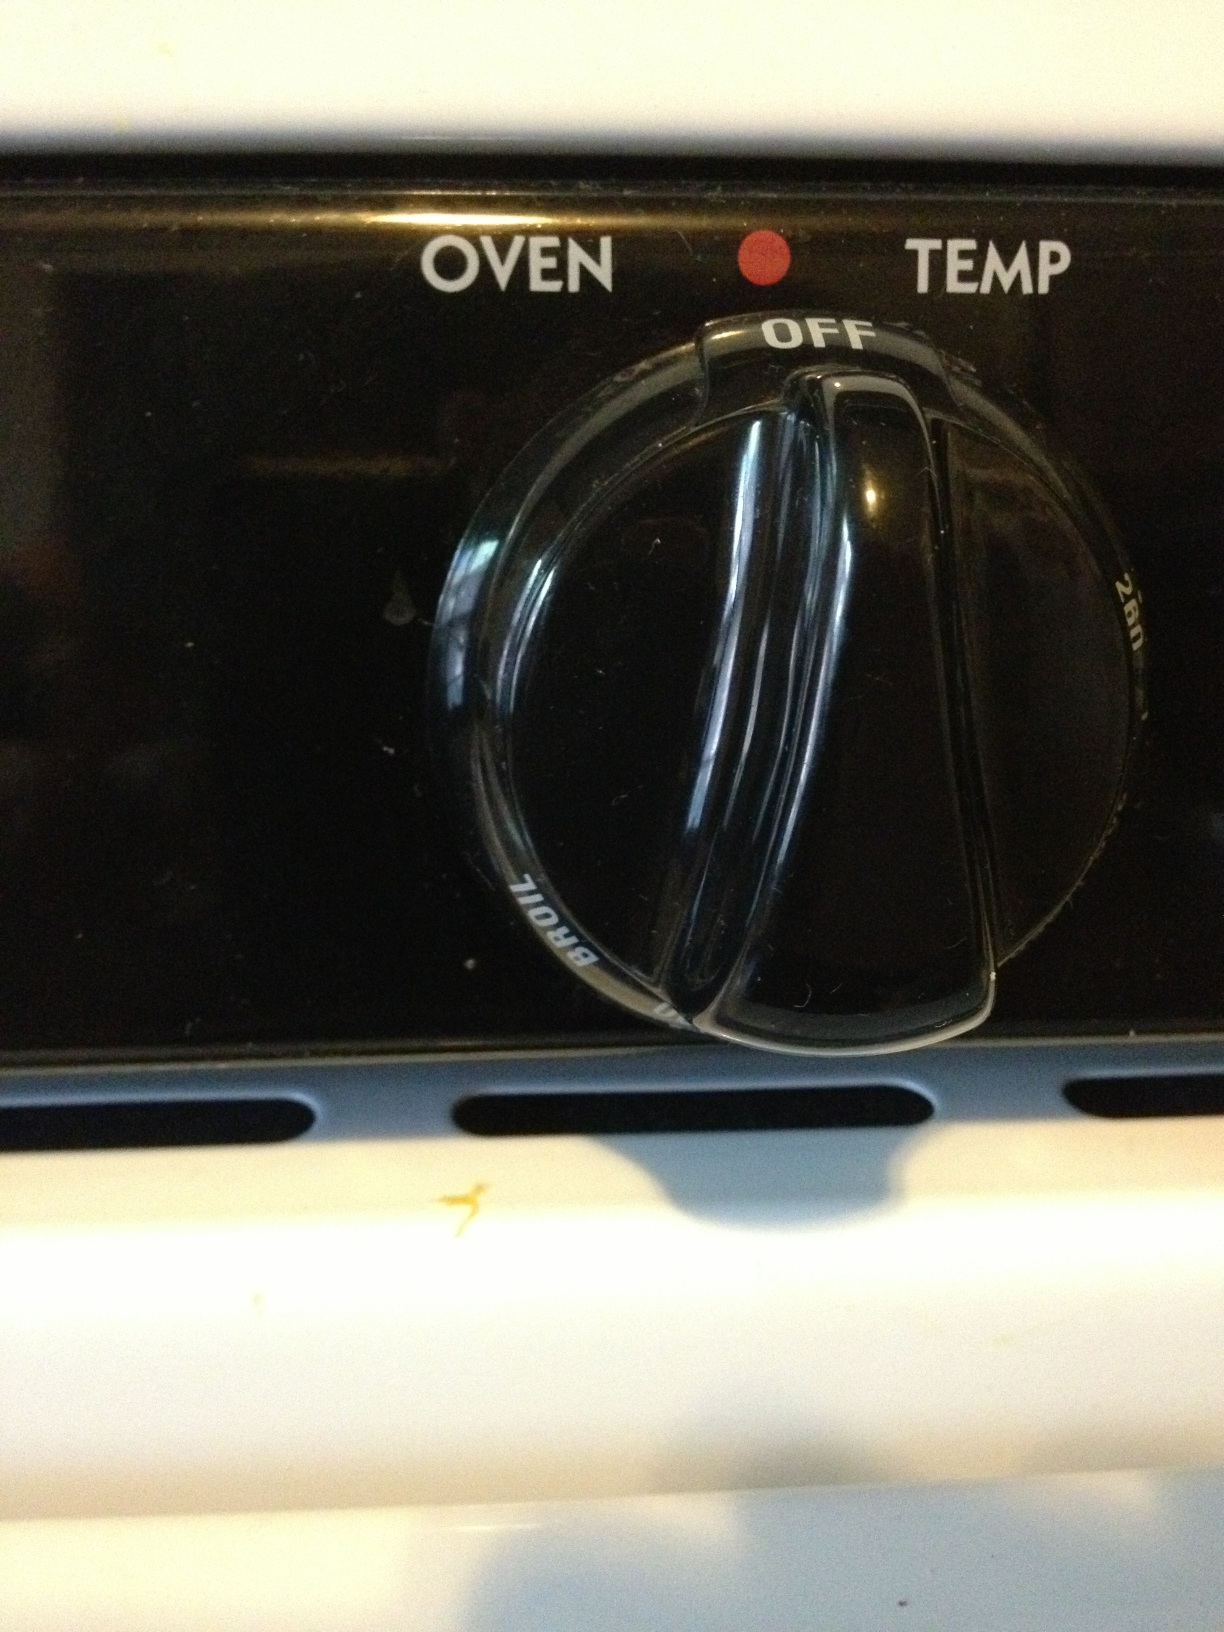 Black oven temperature knob that is currently in the off position.